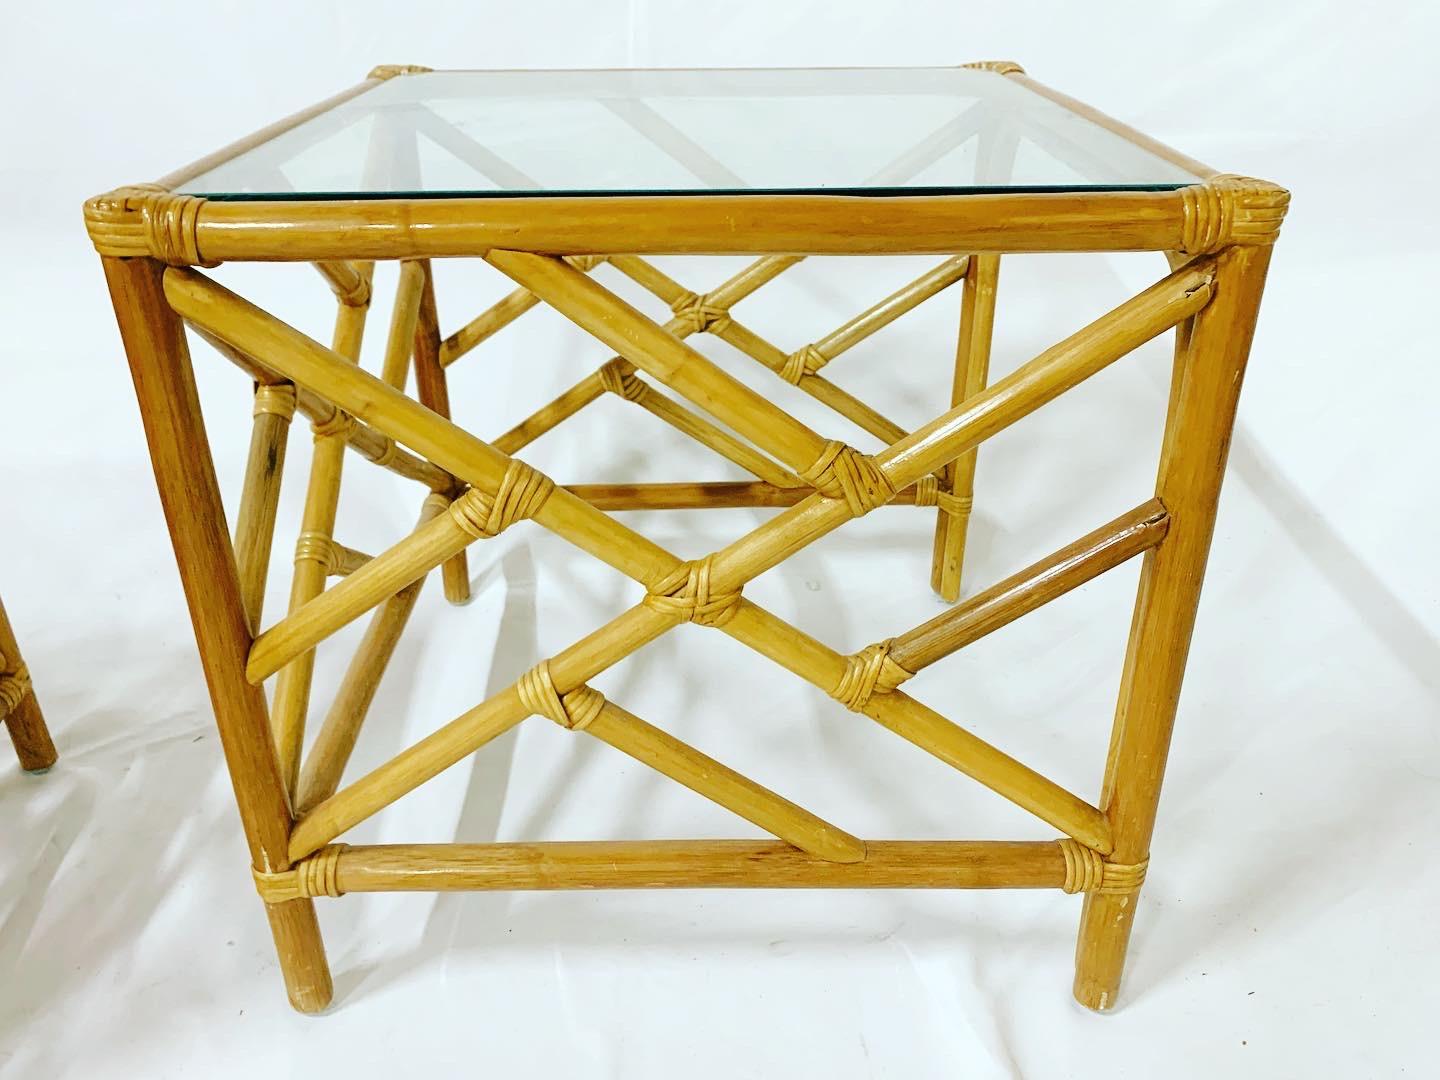 Chippendale Bamboo Rattan Nesting Tables – Set of 3 6